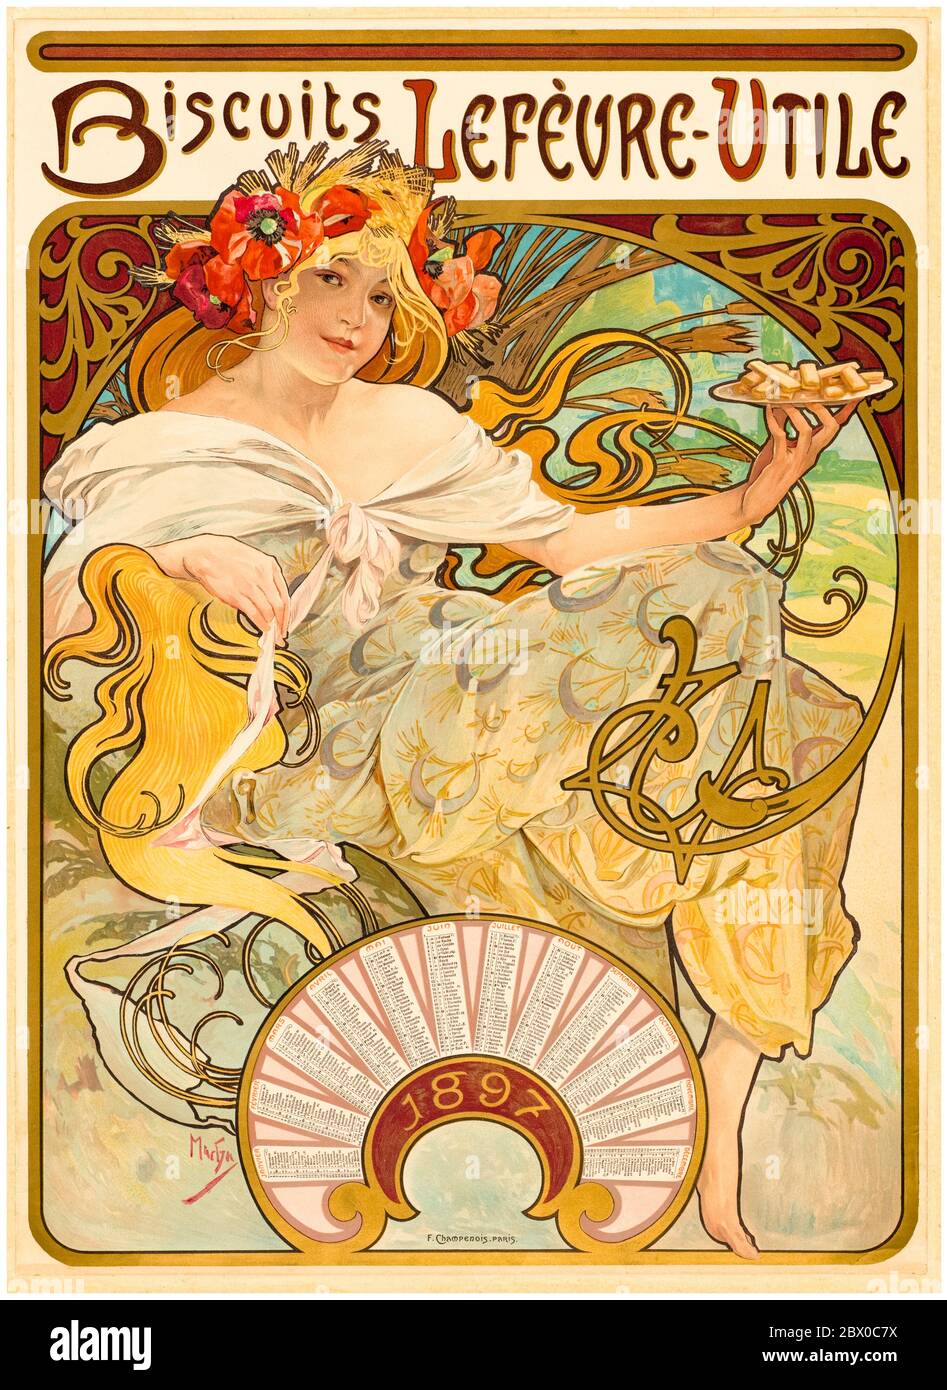 Alphonse Mucha, Biscuits Lefèvre-Utile, lithographic print, 1896 Stock Photo